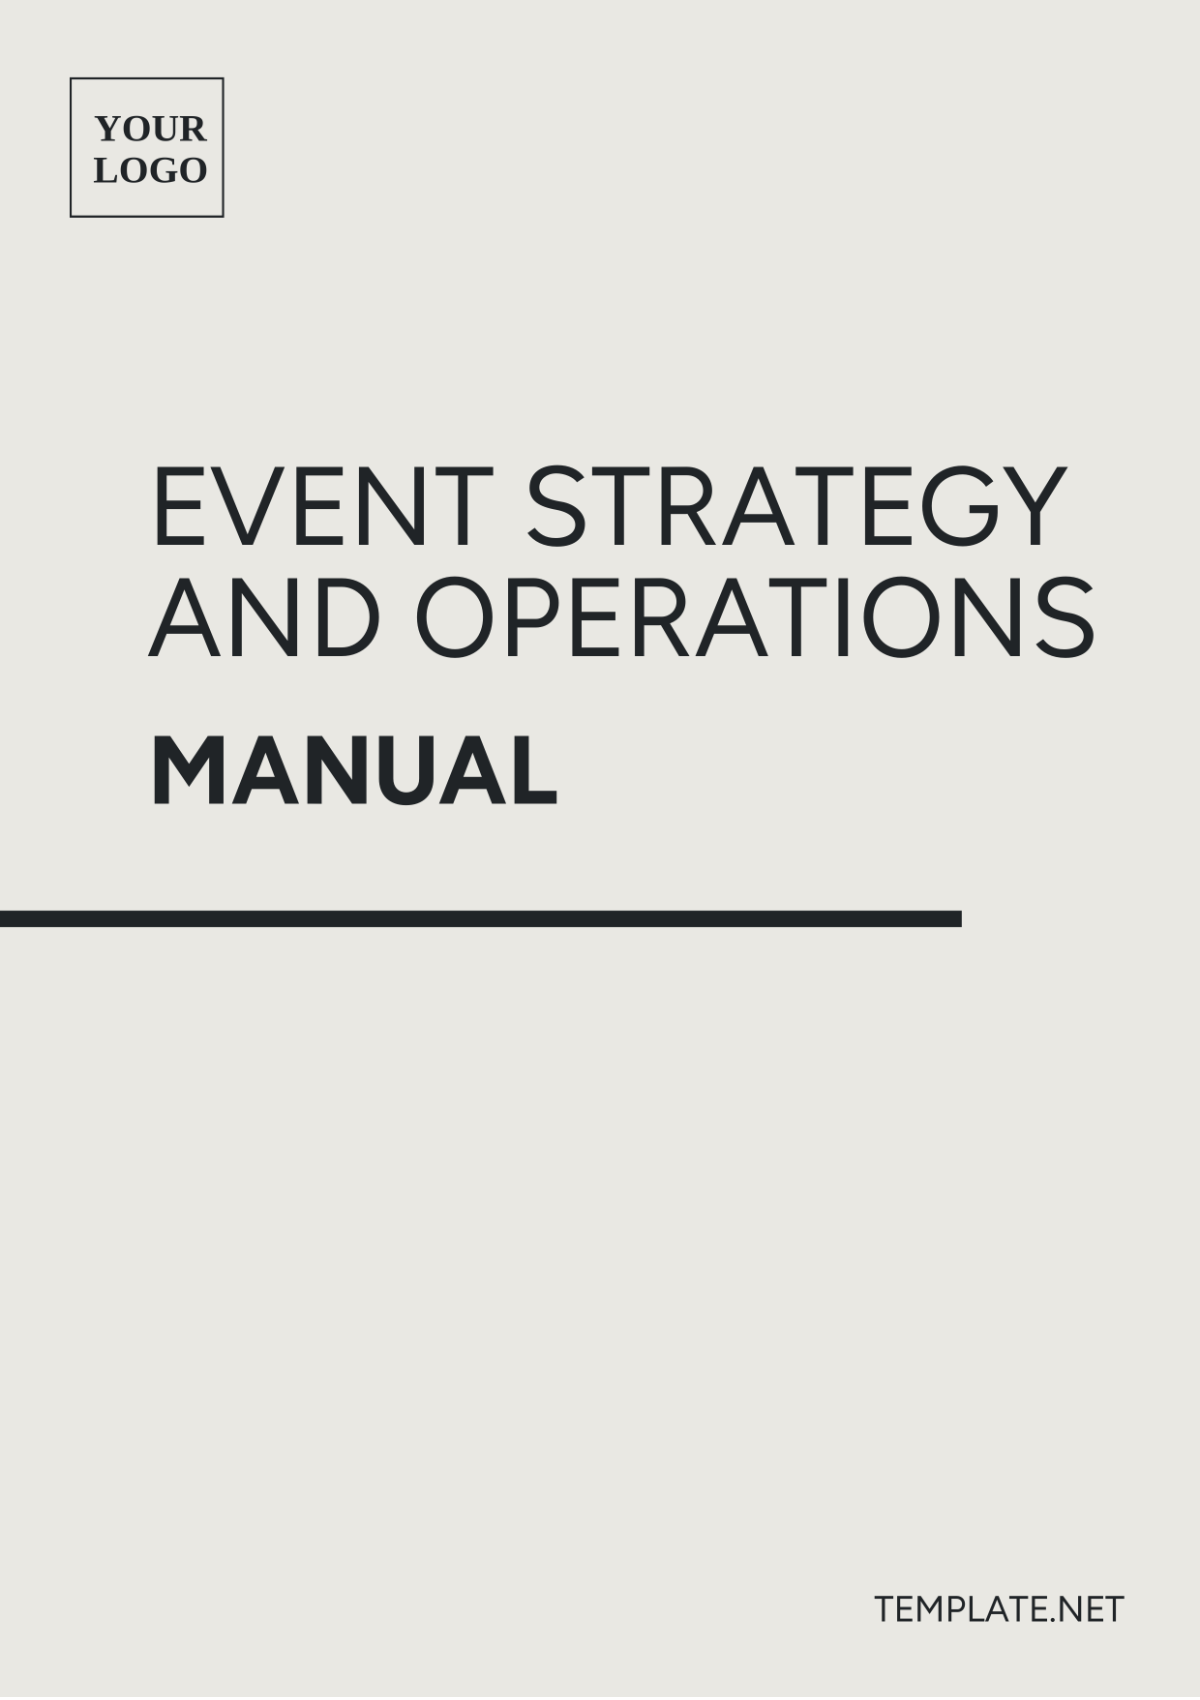 Event Strategy & Operations Manual Template